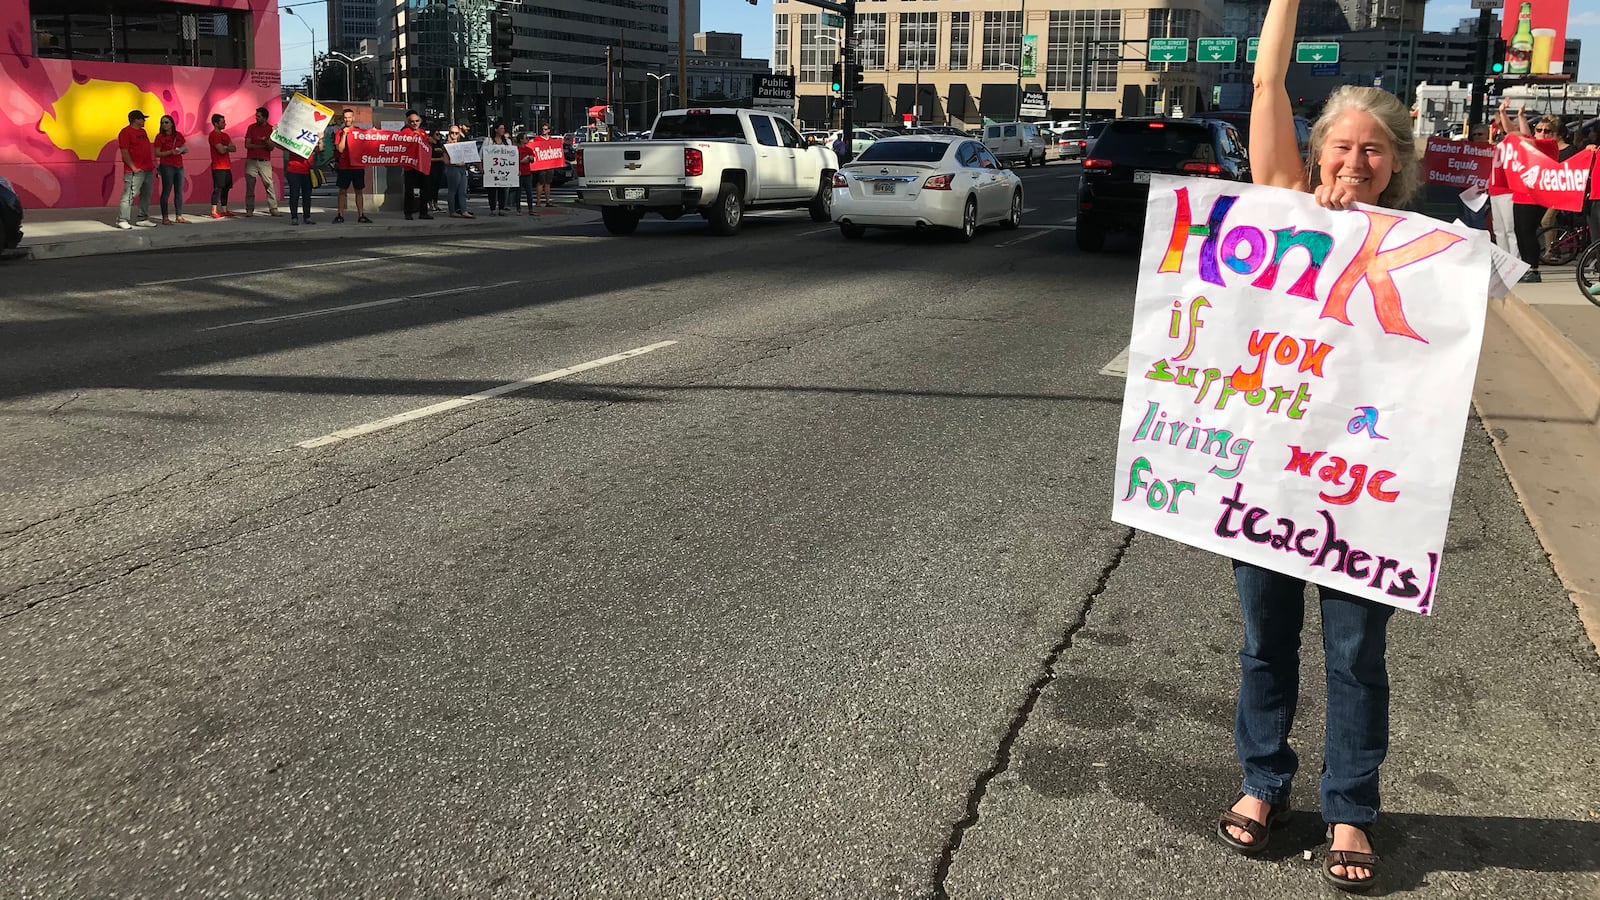 A Denver teacher rallies support for increased teacher pay in front of the school district headquarters in September 2018.